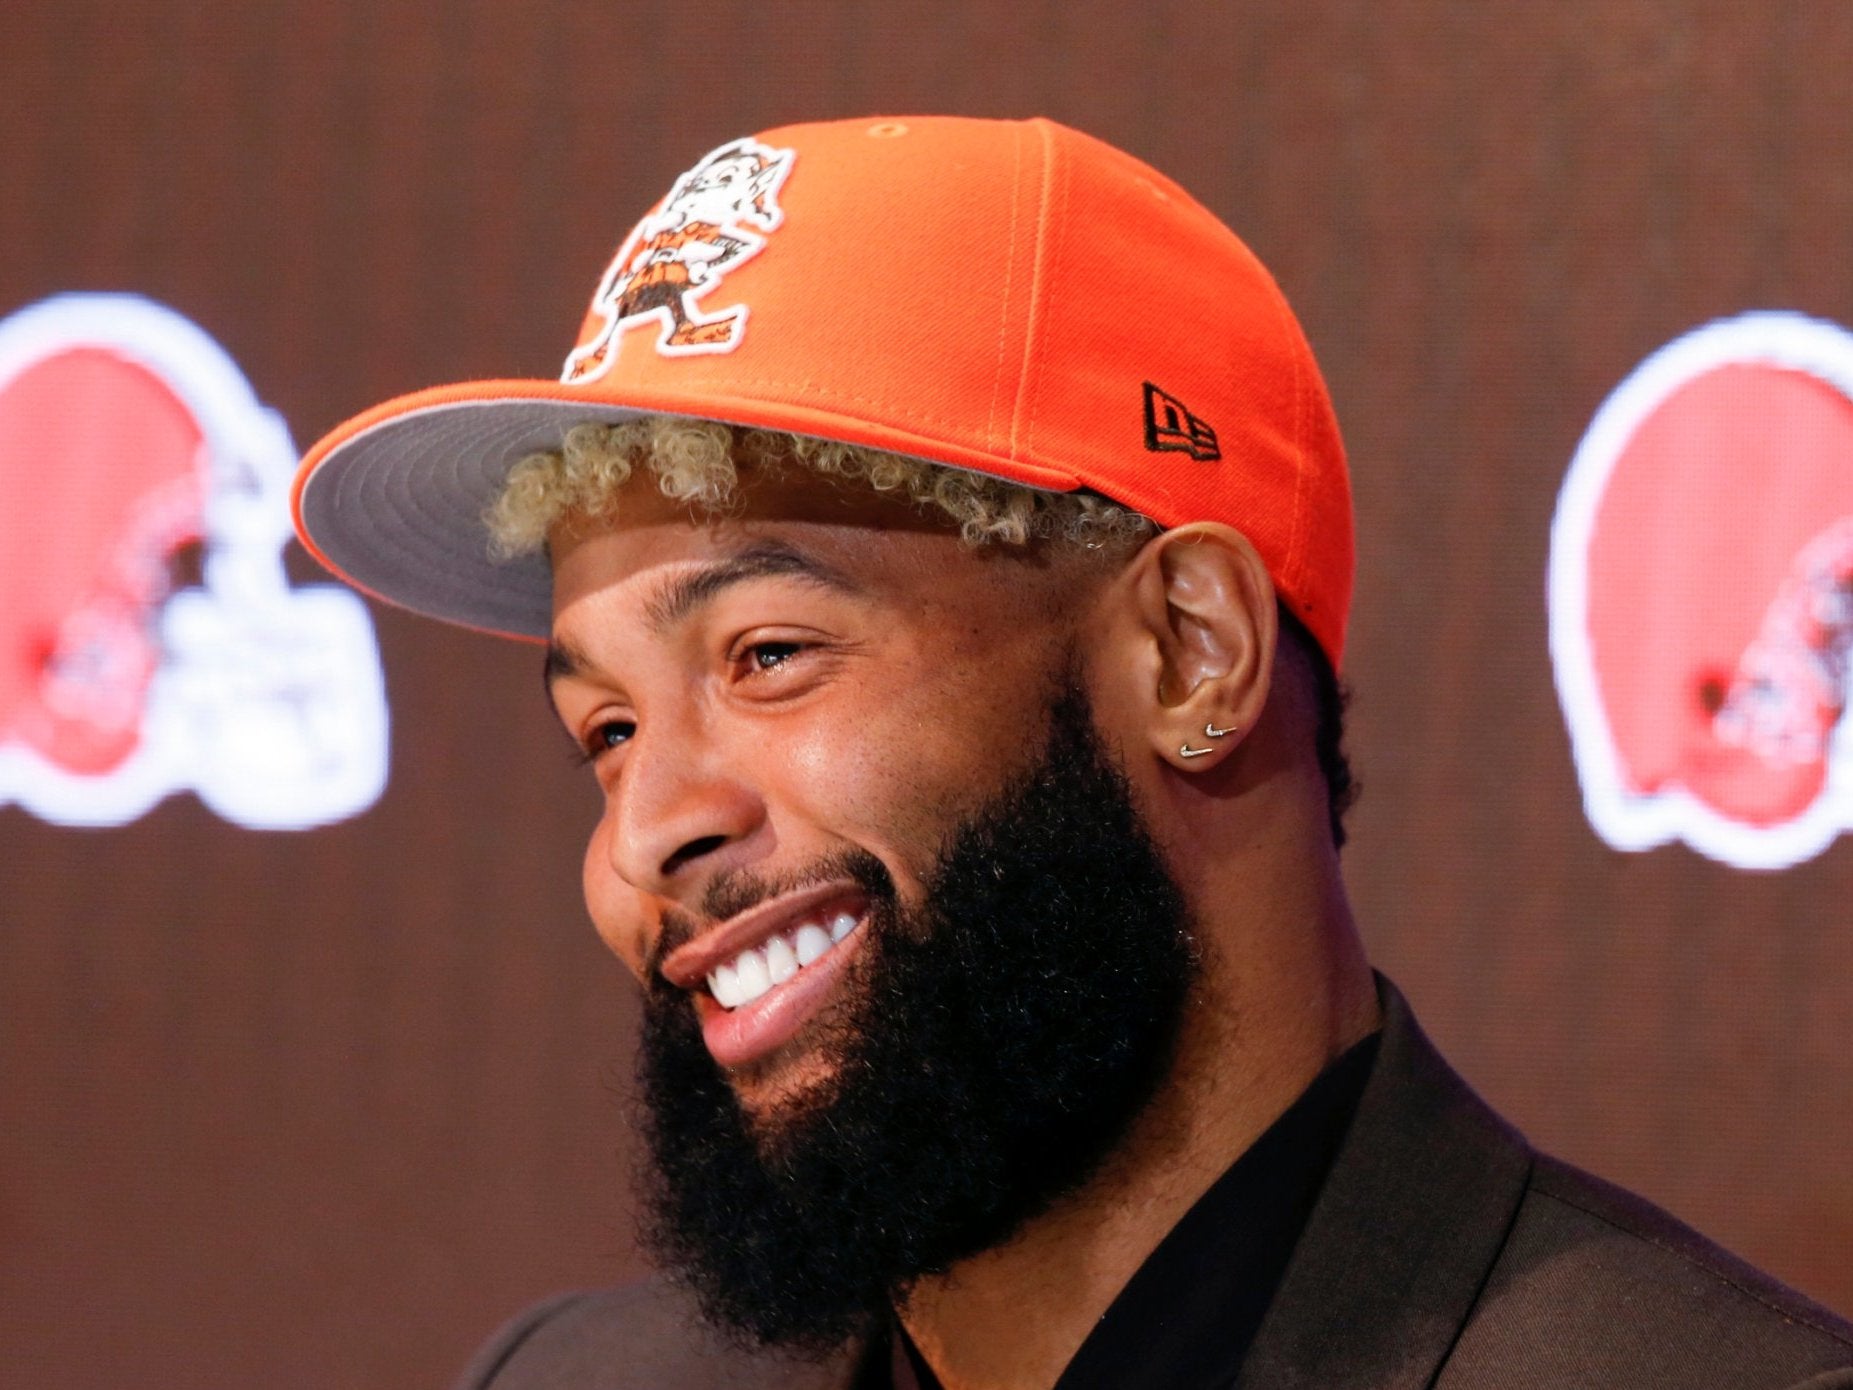 Odell Beckham Jr has brought glitz to the Browns